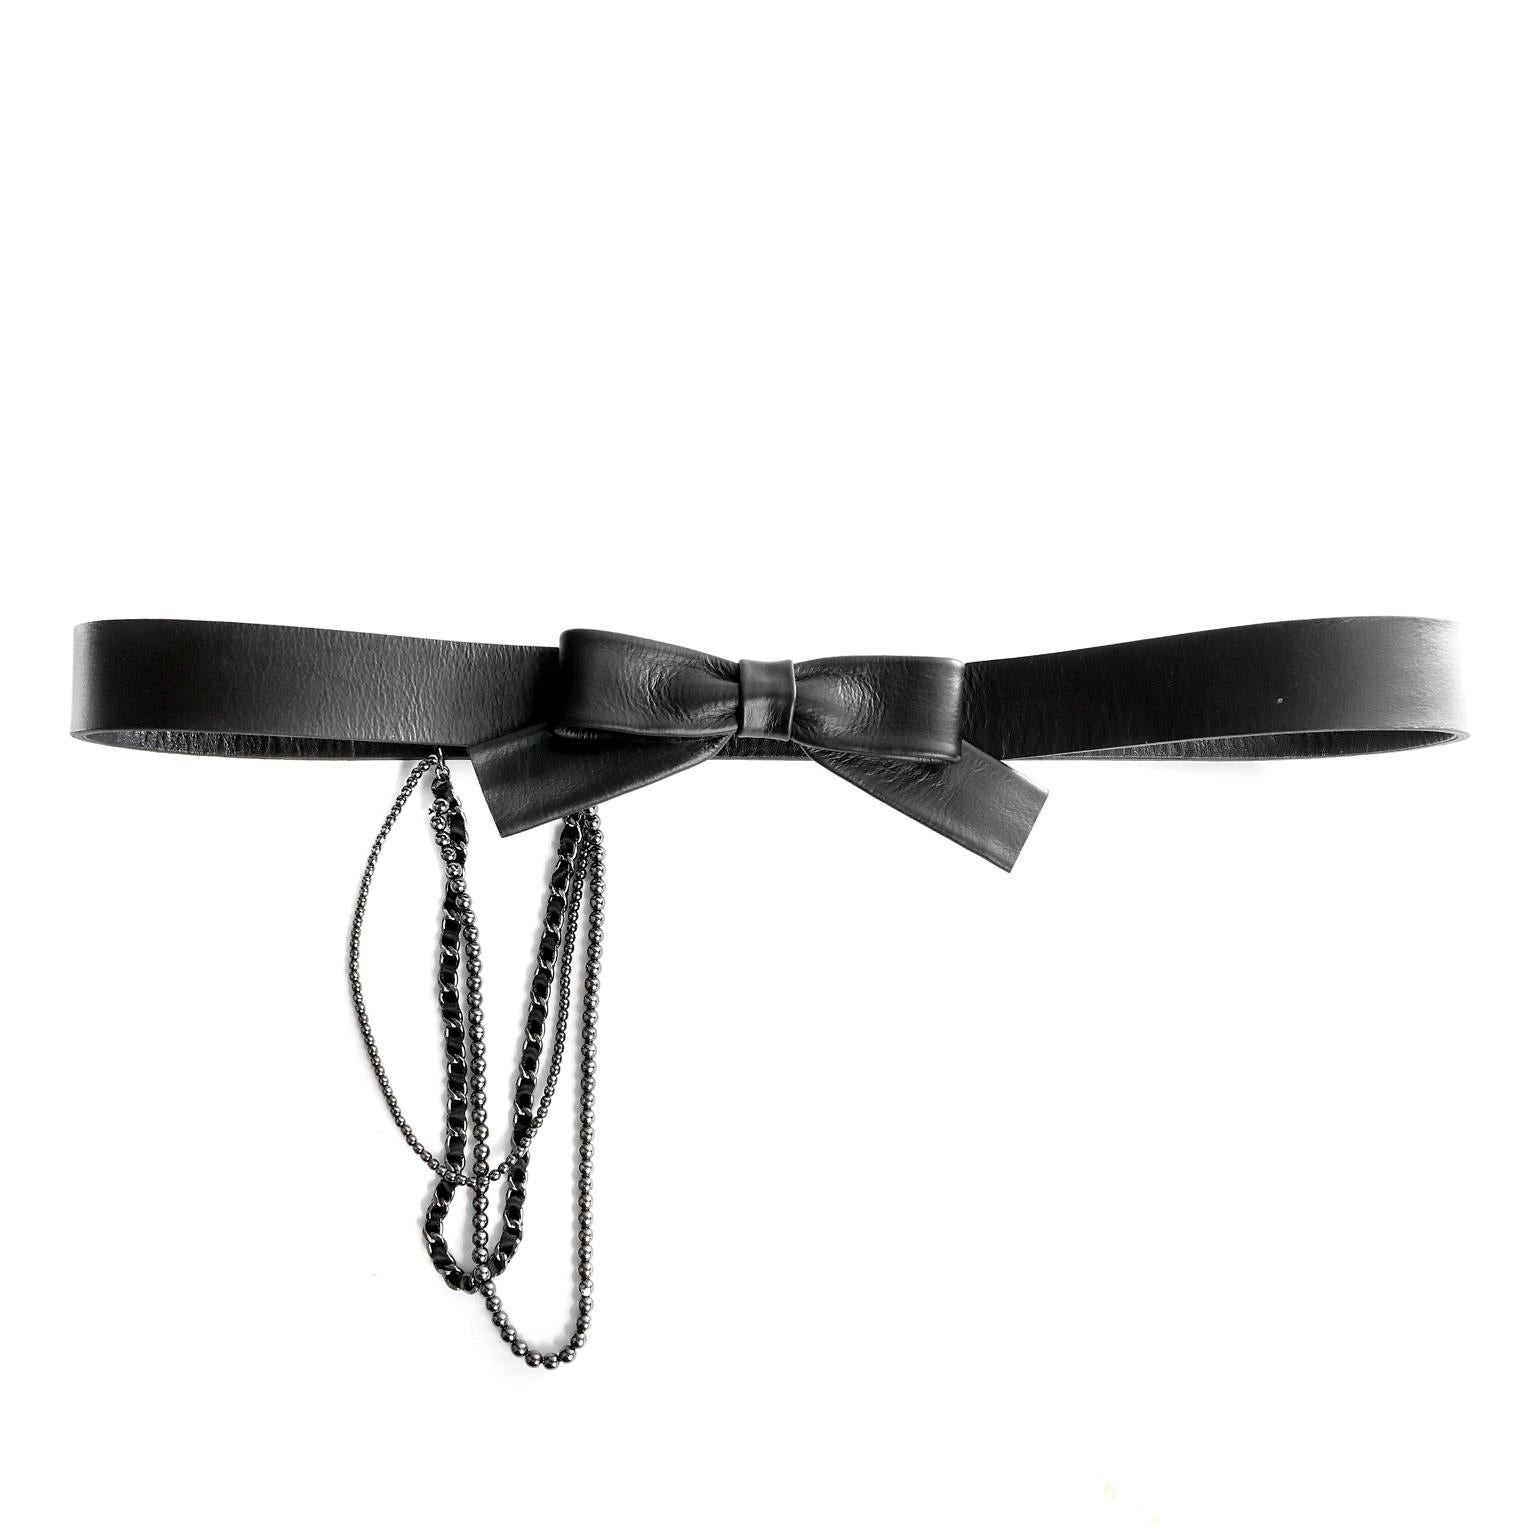 This authentic Chanel Black Bow Belt is in mint condition.  Black leather belt is covered with black wool fabric and has a central bow closure.  Three different style chains dangle decoratively from the side.  Snap closure.   Made in France. Size